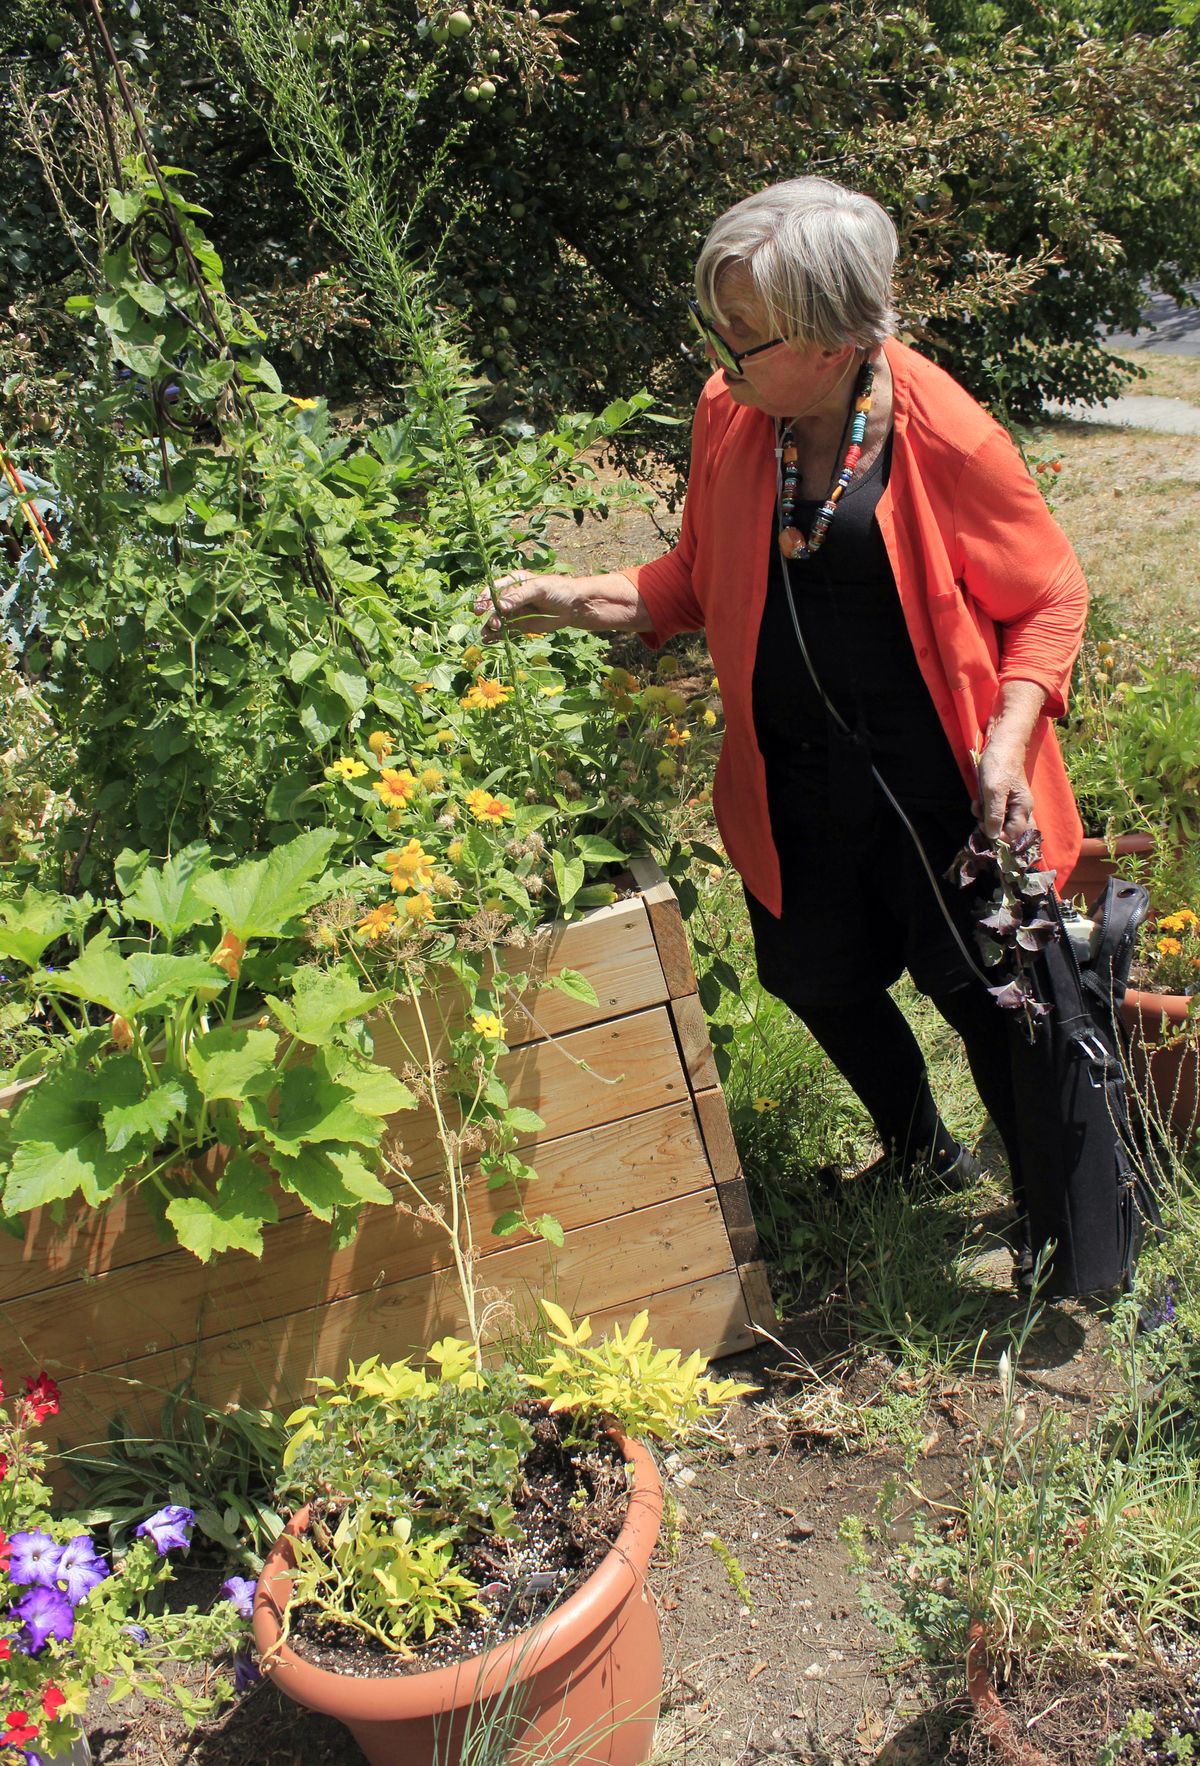 A bevy of health problems kept Linda Pall in and out of hospitals and care facilities for nearly a year. This spring, she felt well enough to undertake a new project: transforming her front yard into a life-affirming herb and vegetable garden. (Adriana Janovich)